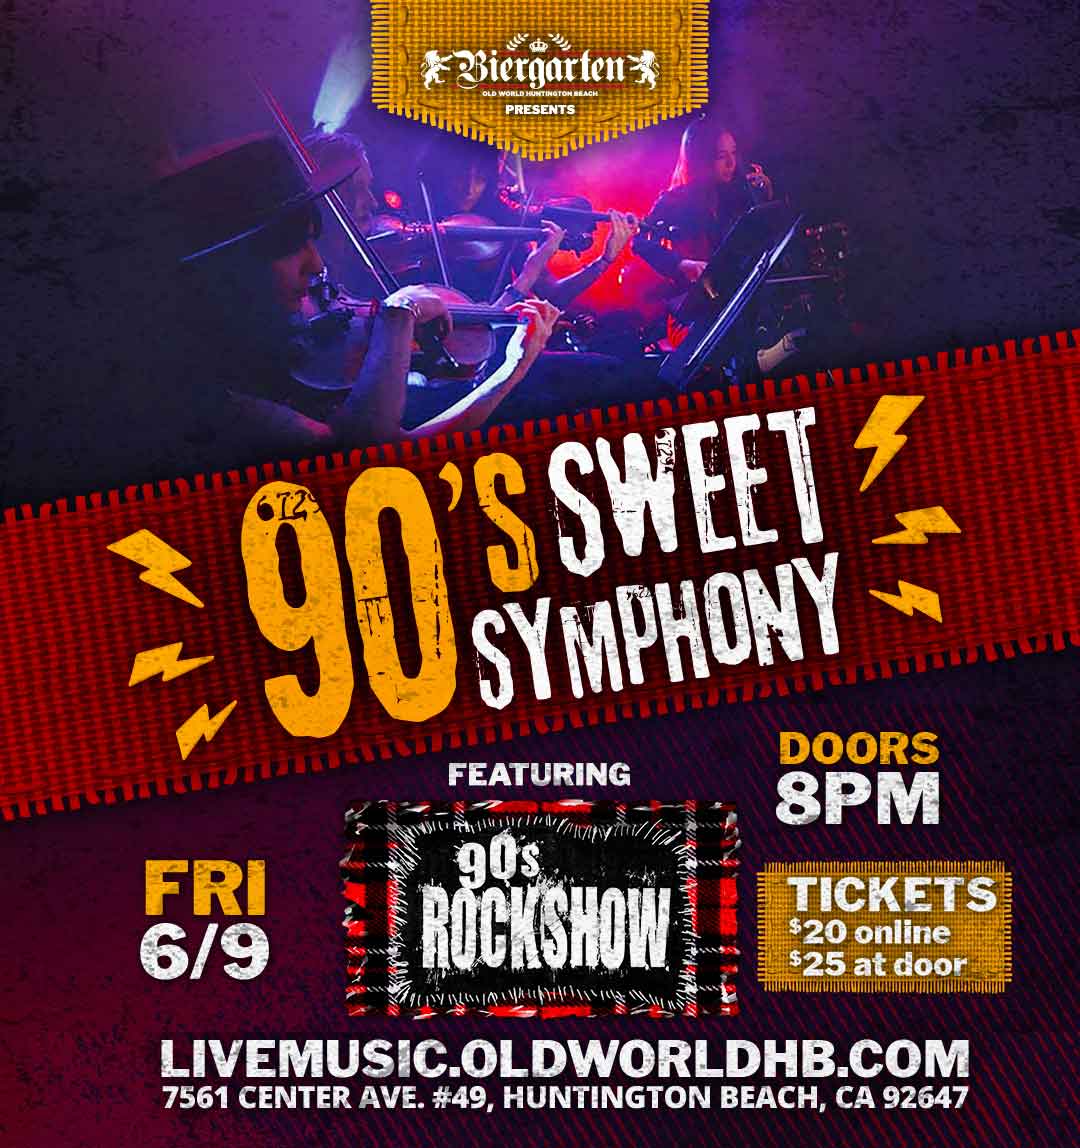 THIS FRIDAY, JUNE 9
90's SWEET SYMPHONY performing LIVE at the Biergarten at Old World Huntington Beach

BUY YOUR TICKETS!
$20 online
$25 at the door

👉BUY TICKETS: universe.com/events/90s-roc…

👉LEARN MORE: events.oldworldhb.com/event/90s-swee…

#biergarten #orangecountyCA #HuntingtonBeach